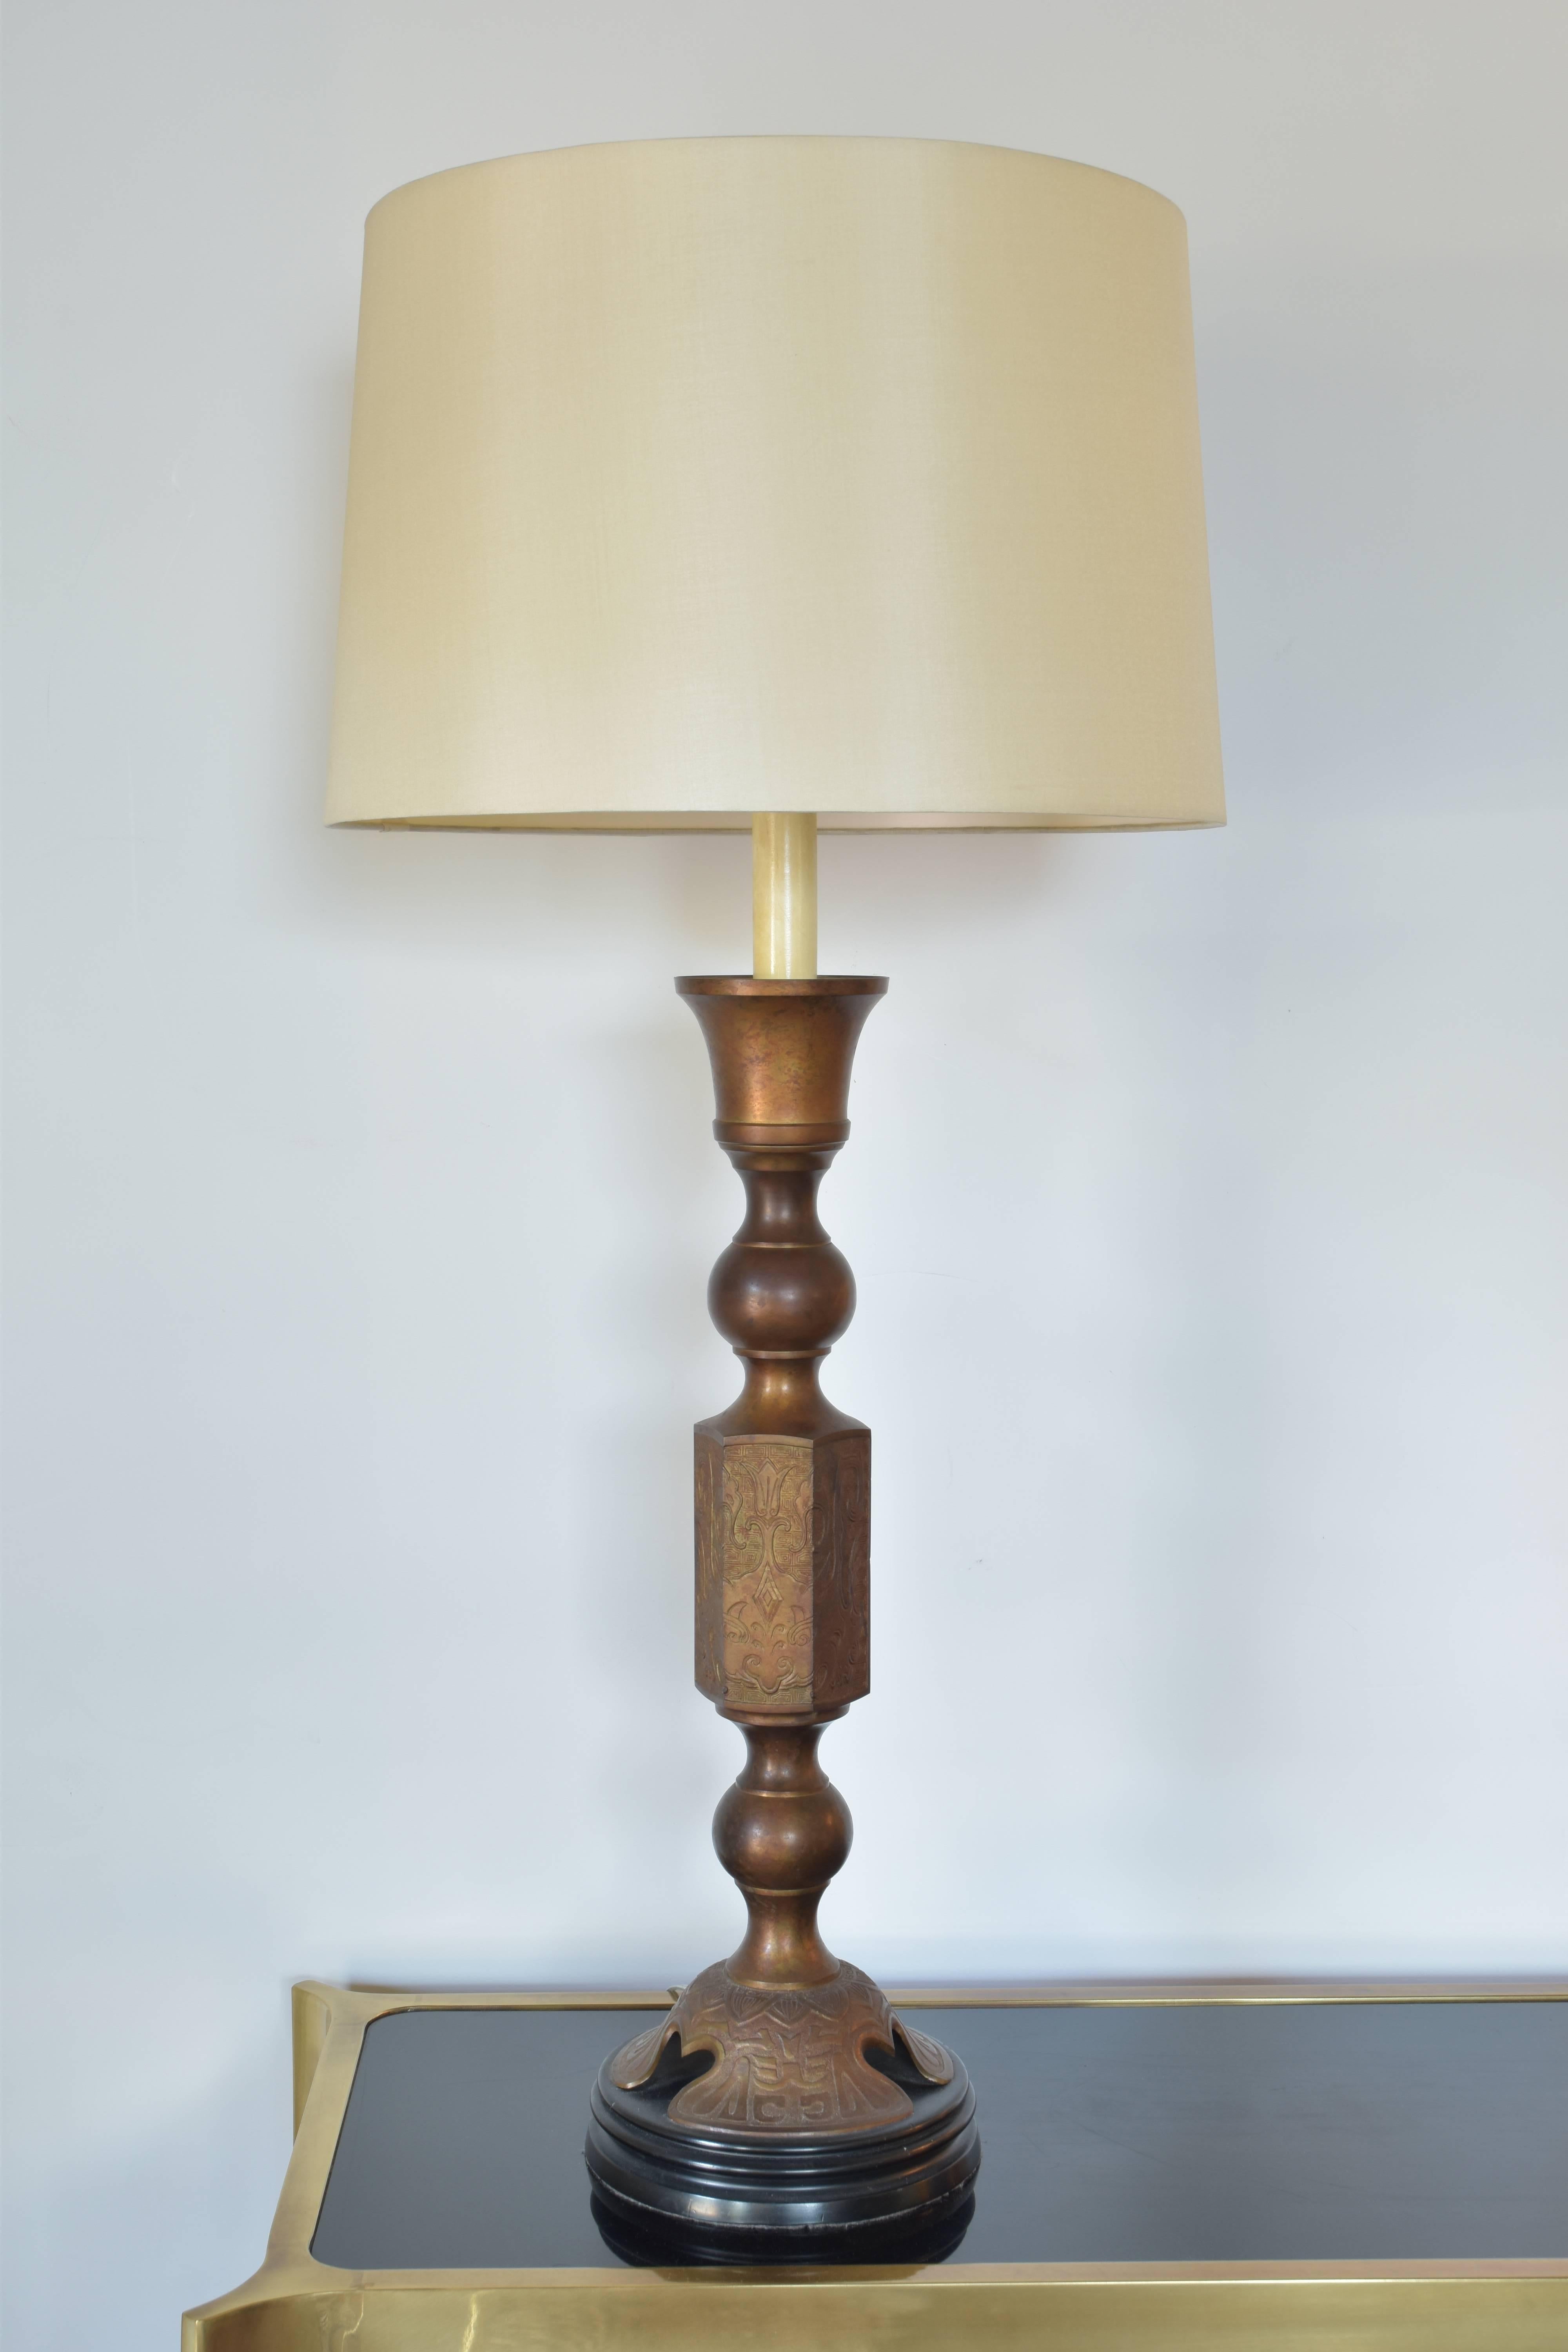 Monumental James Mont style gilded bronze lamp on original wood base.  An exceptionally large and striking lamp.